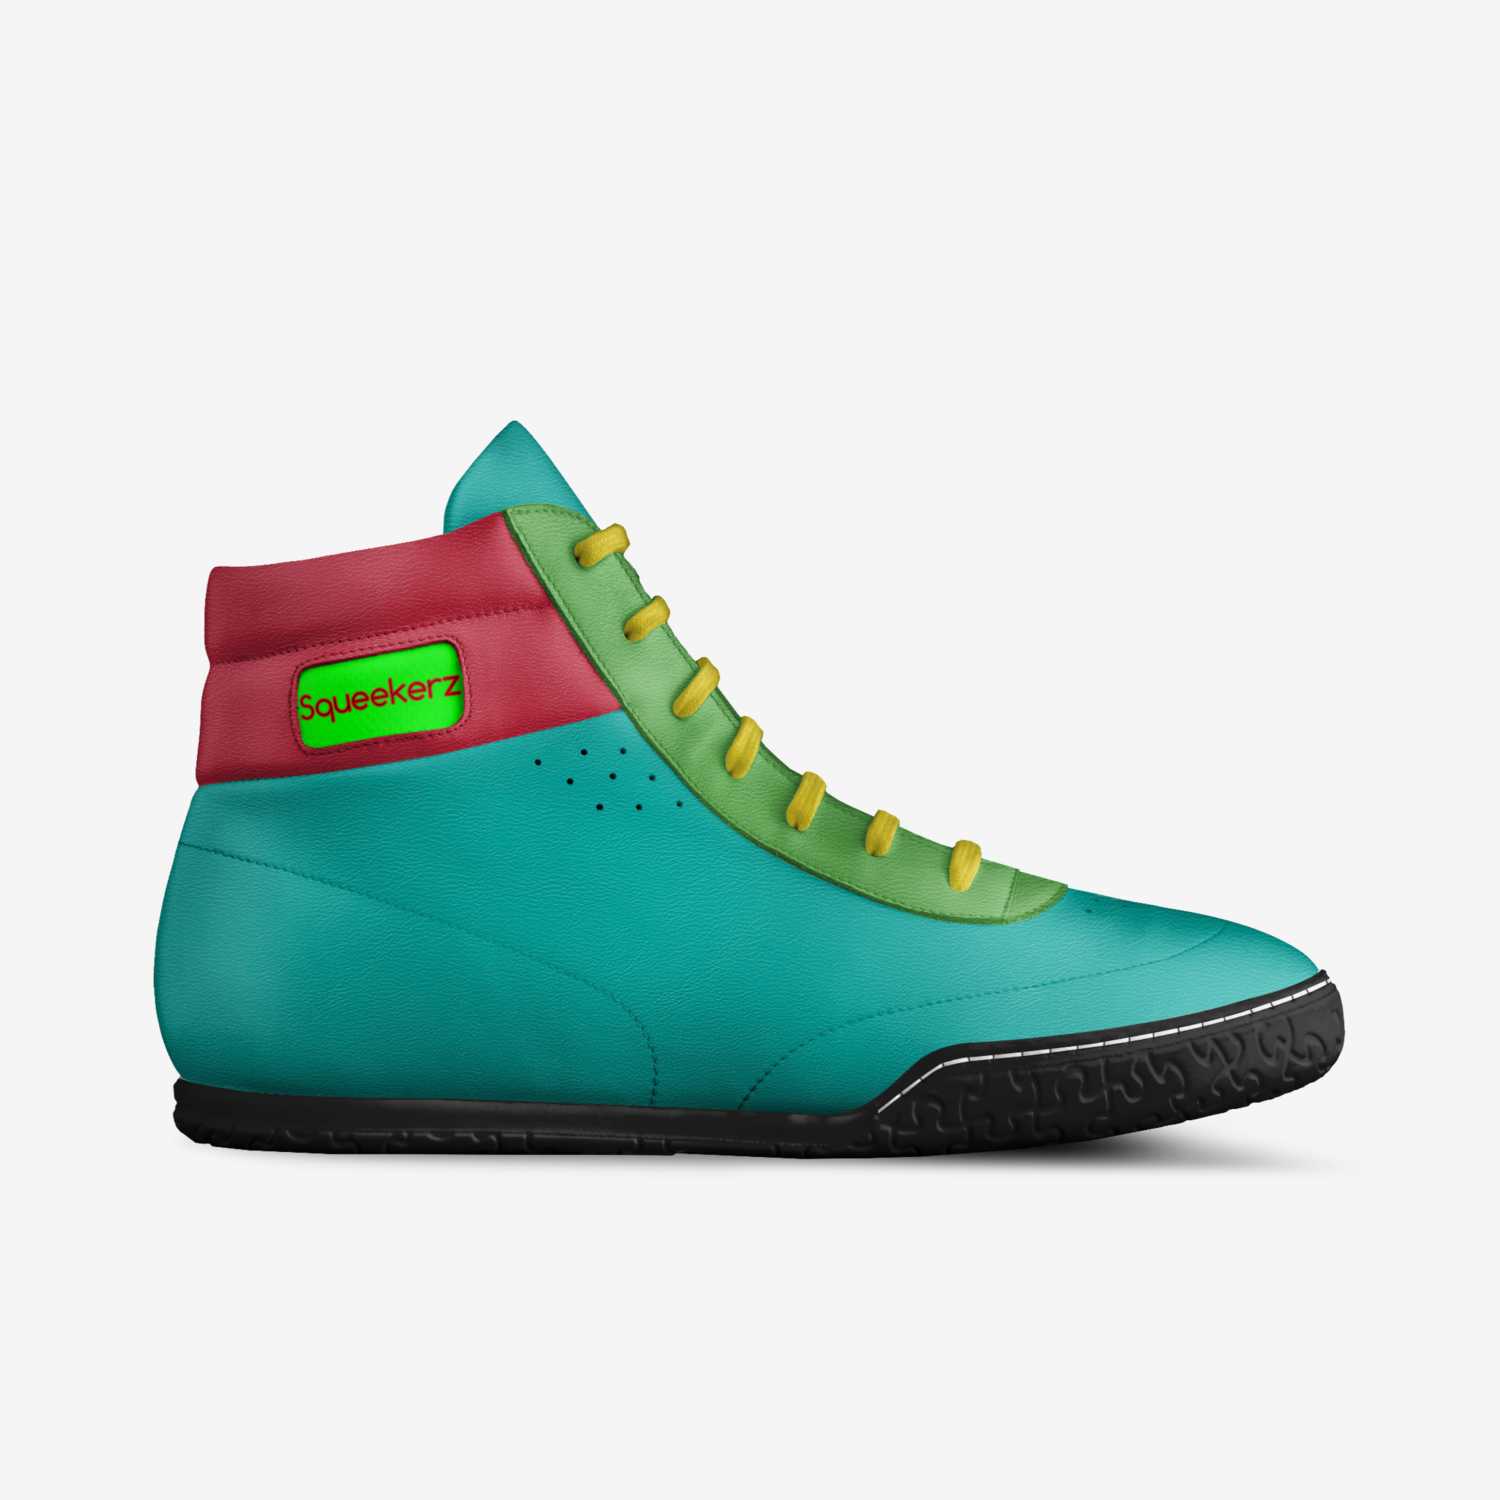 Squeekerz | A Custom Shoe concept by Jacobstrawepic